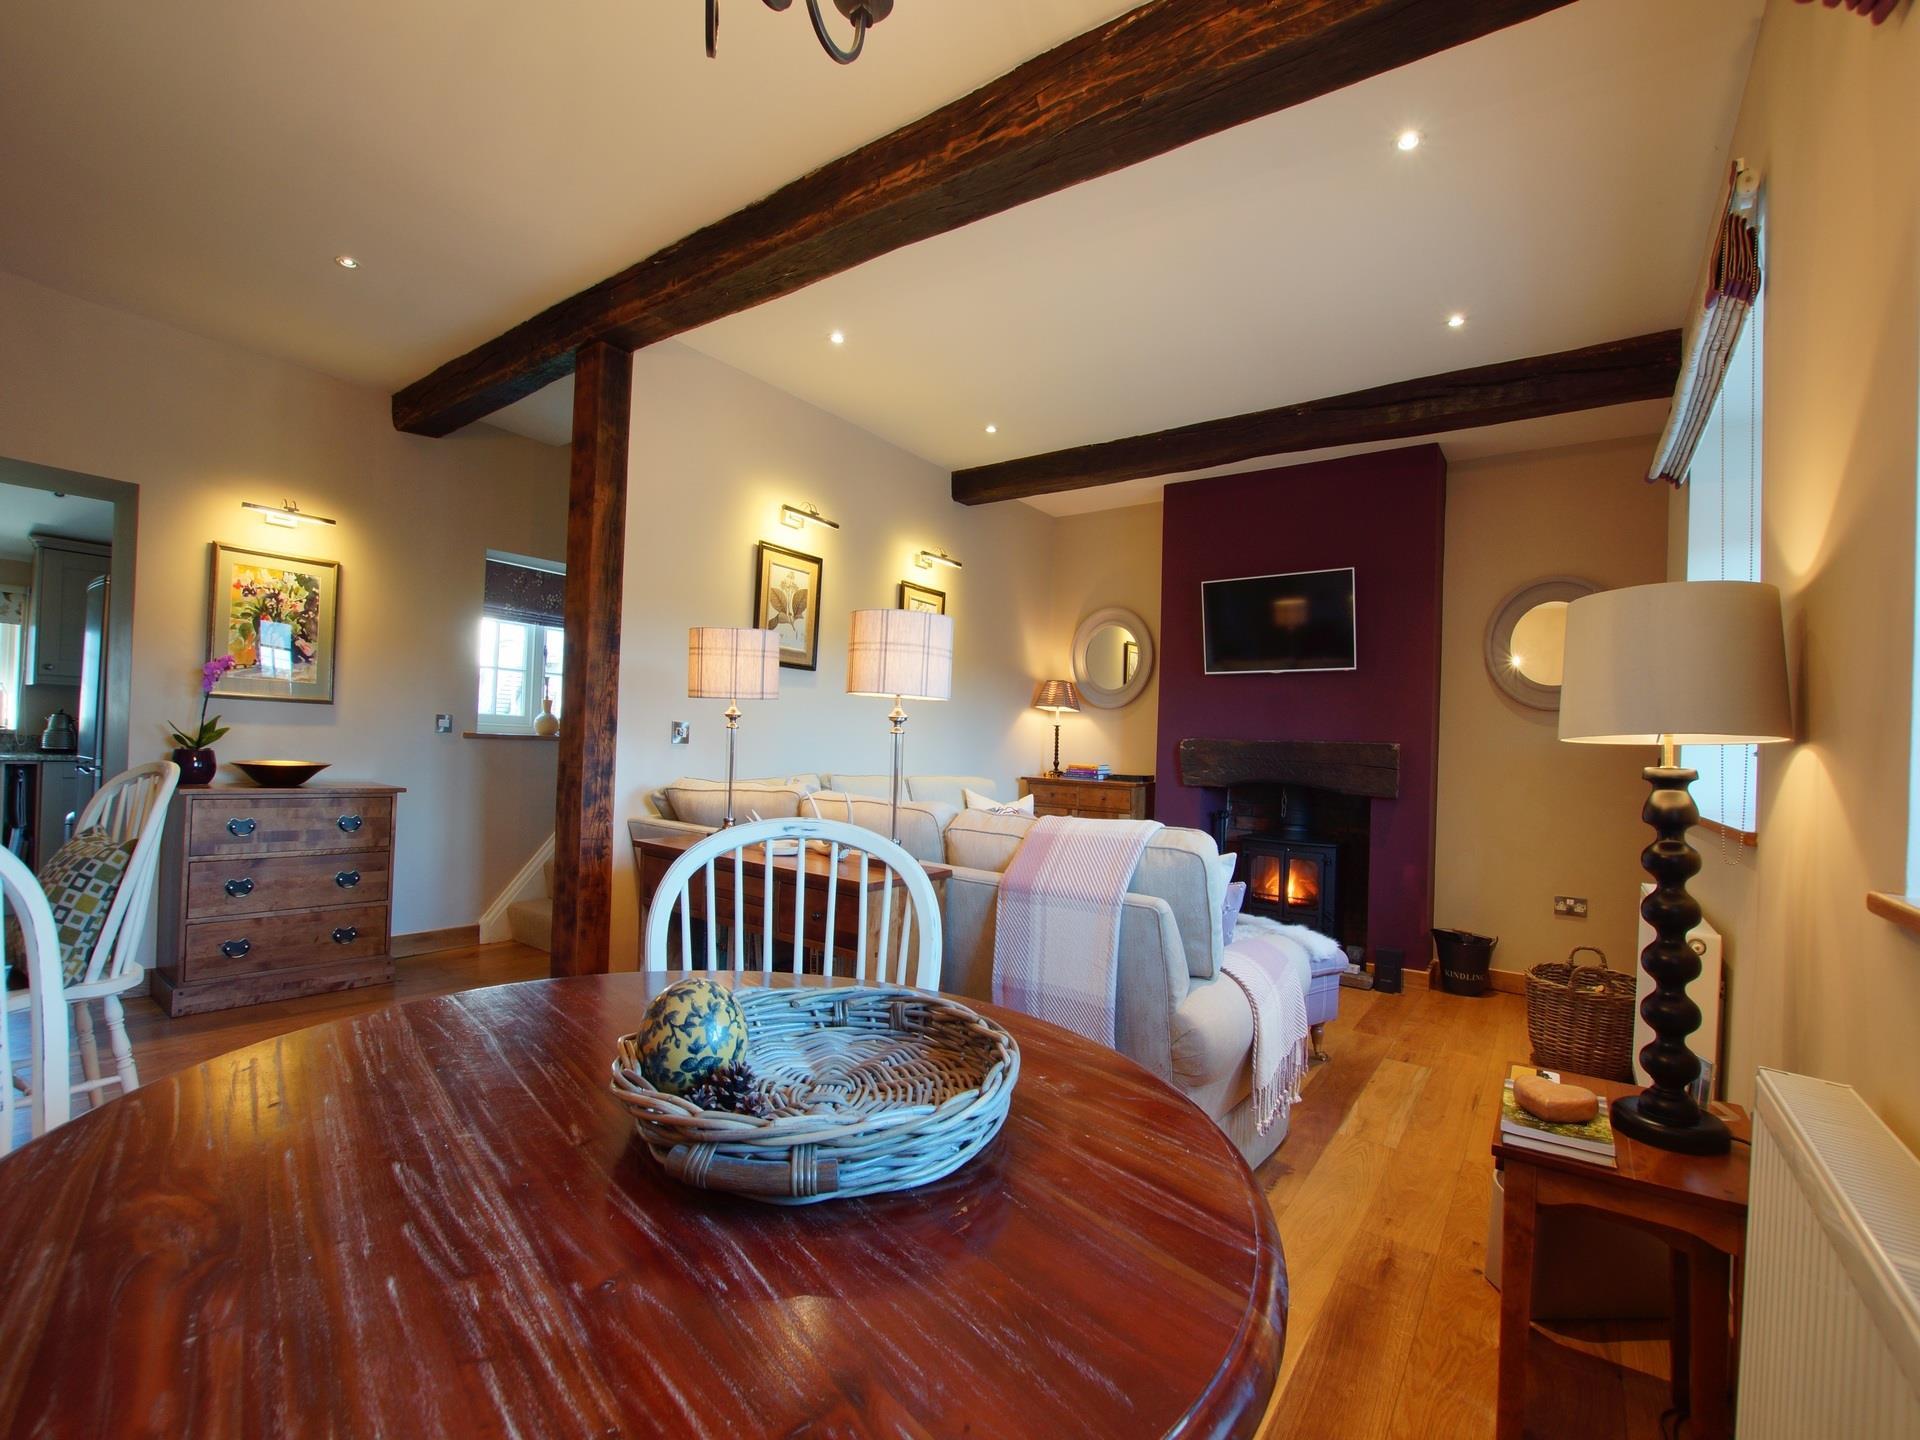 The Cottage Sitting Room